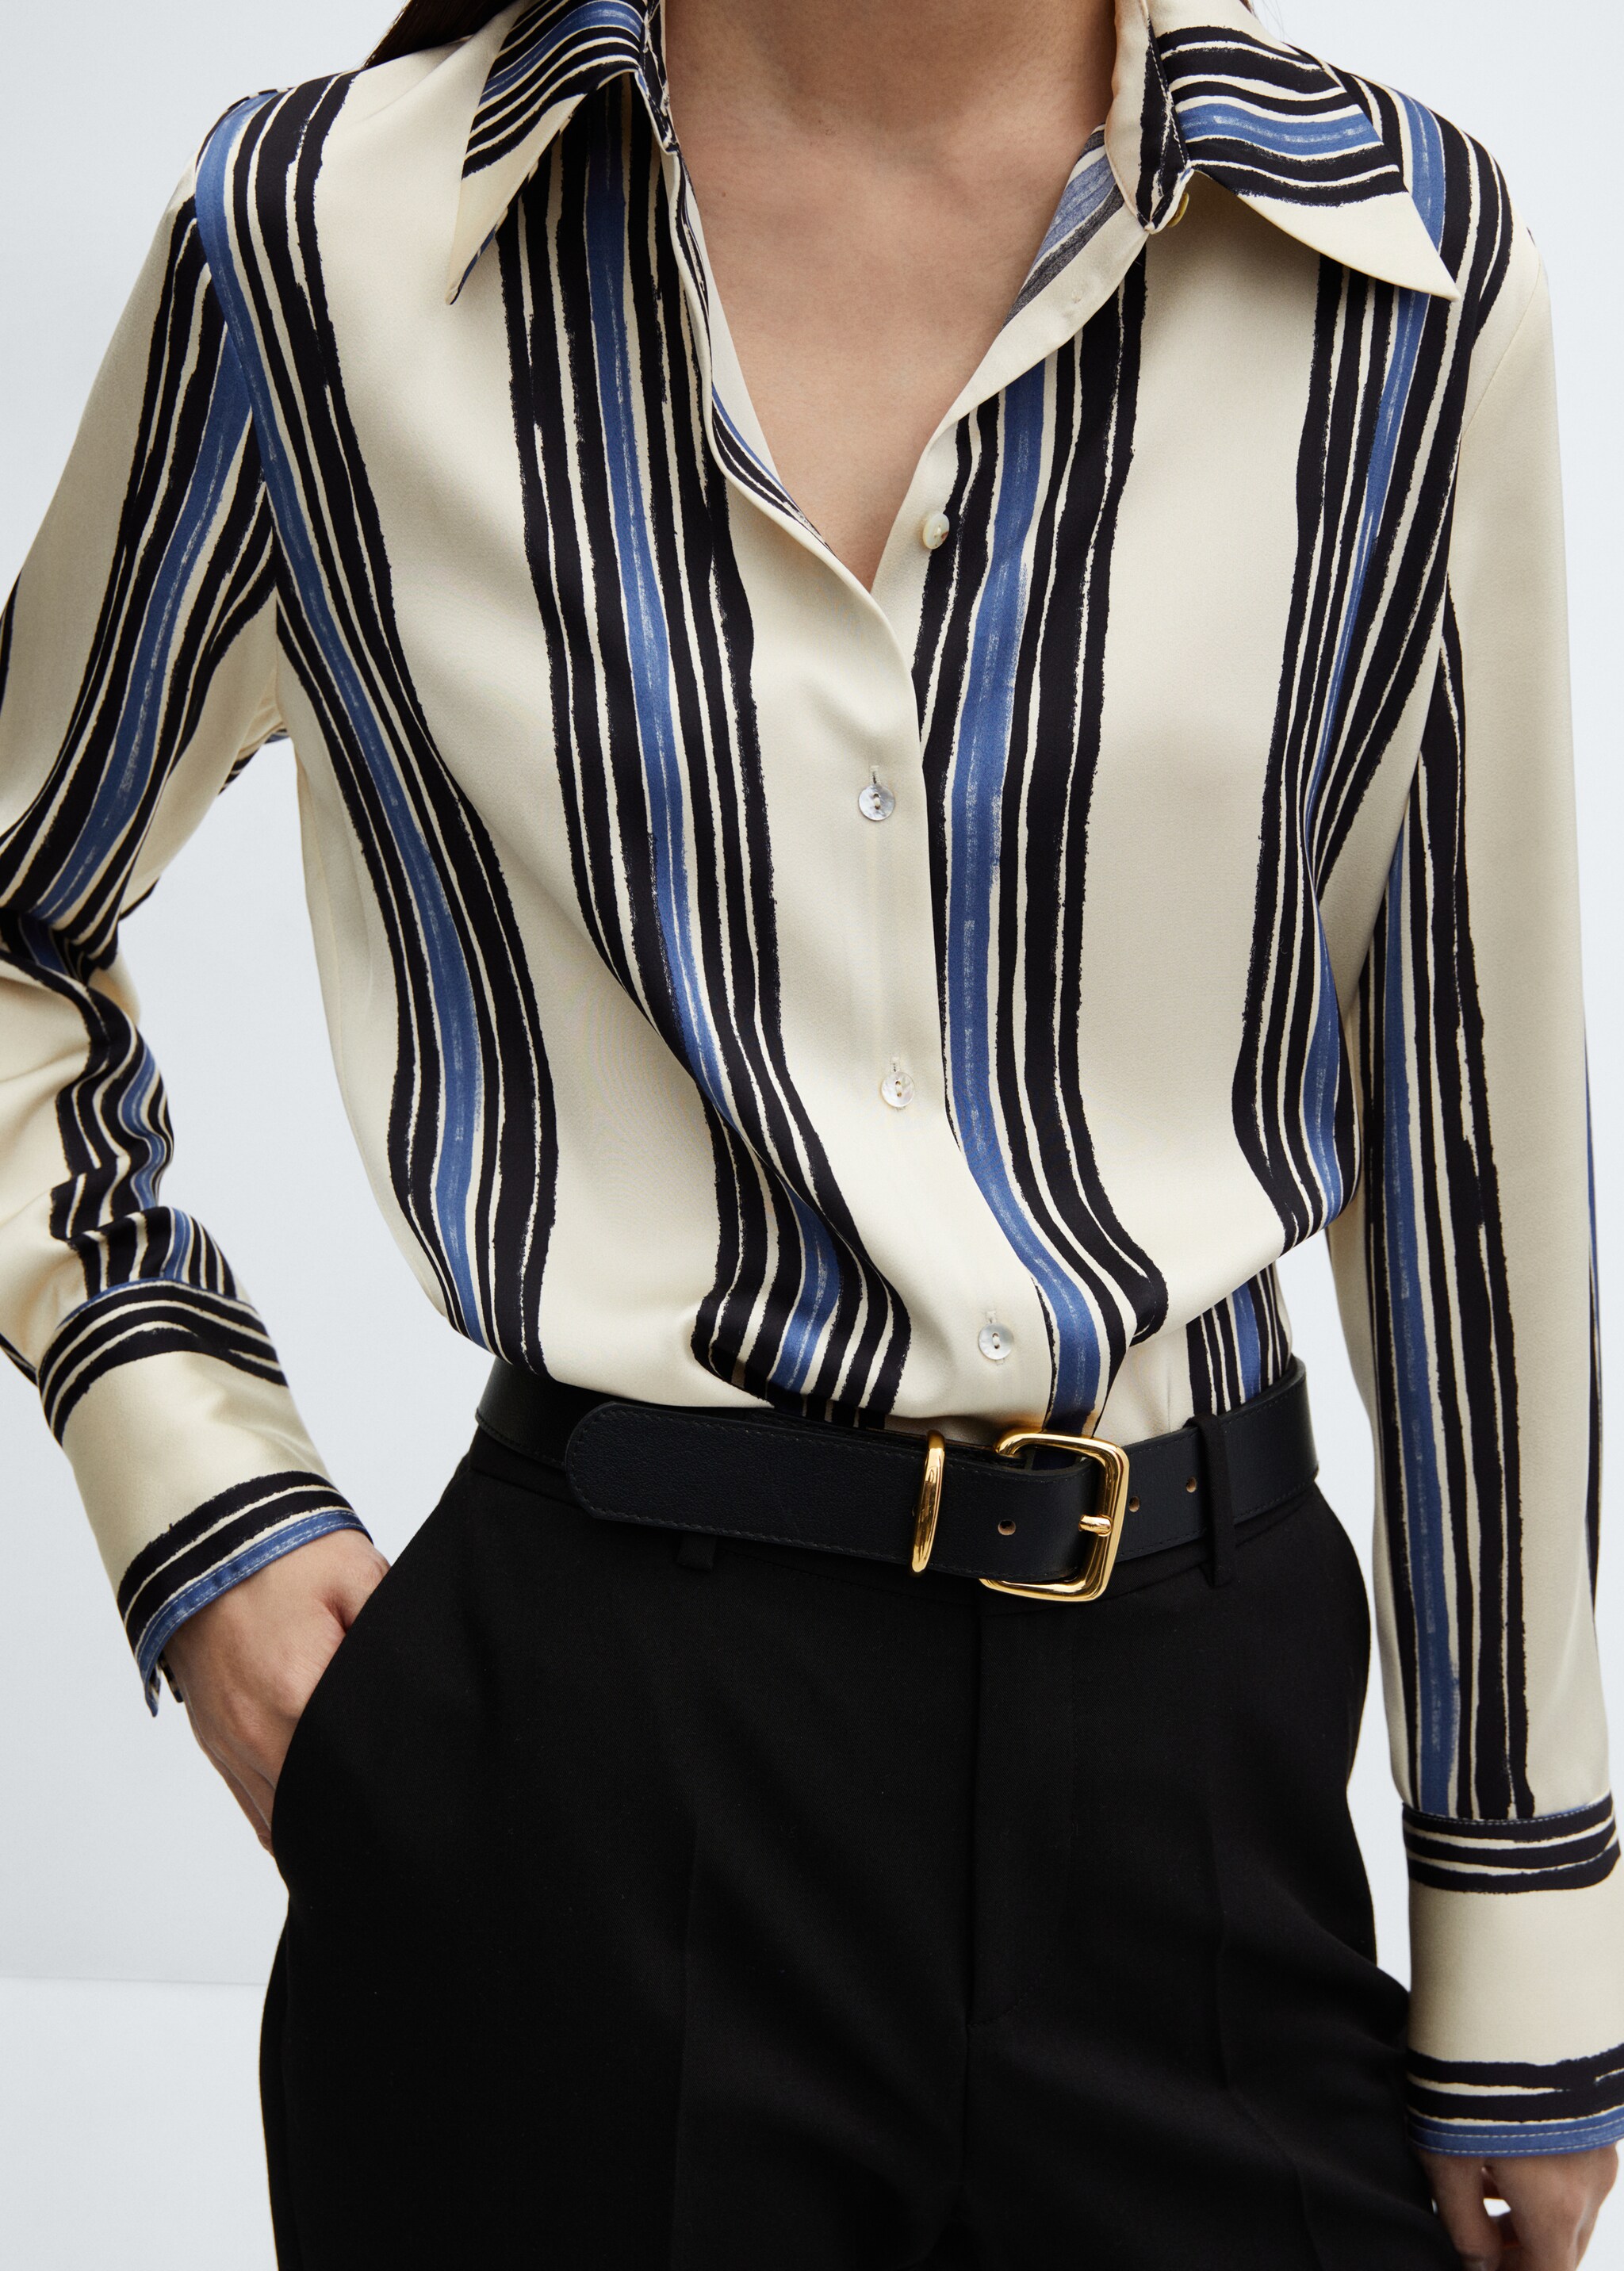 Satin striped shirt - Details of the article 2